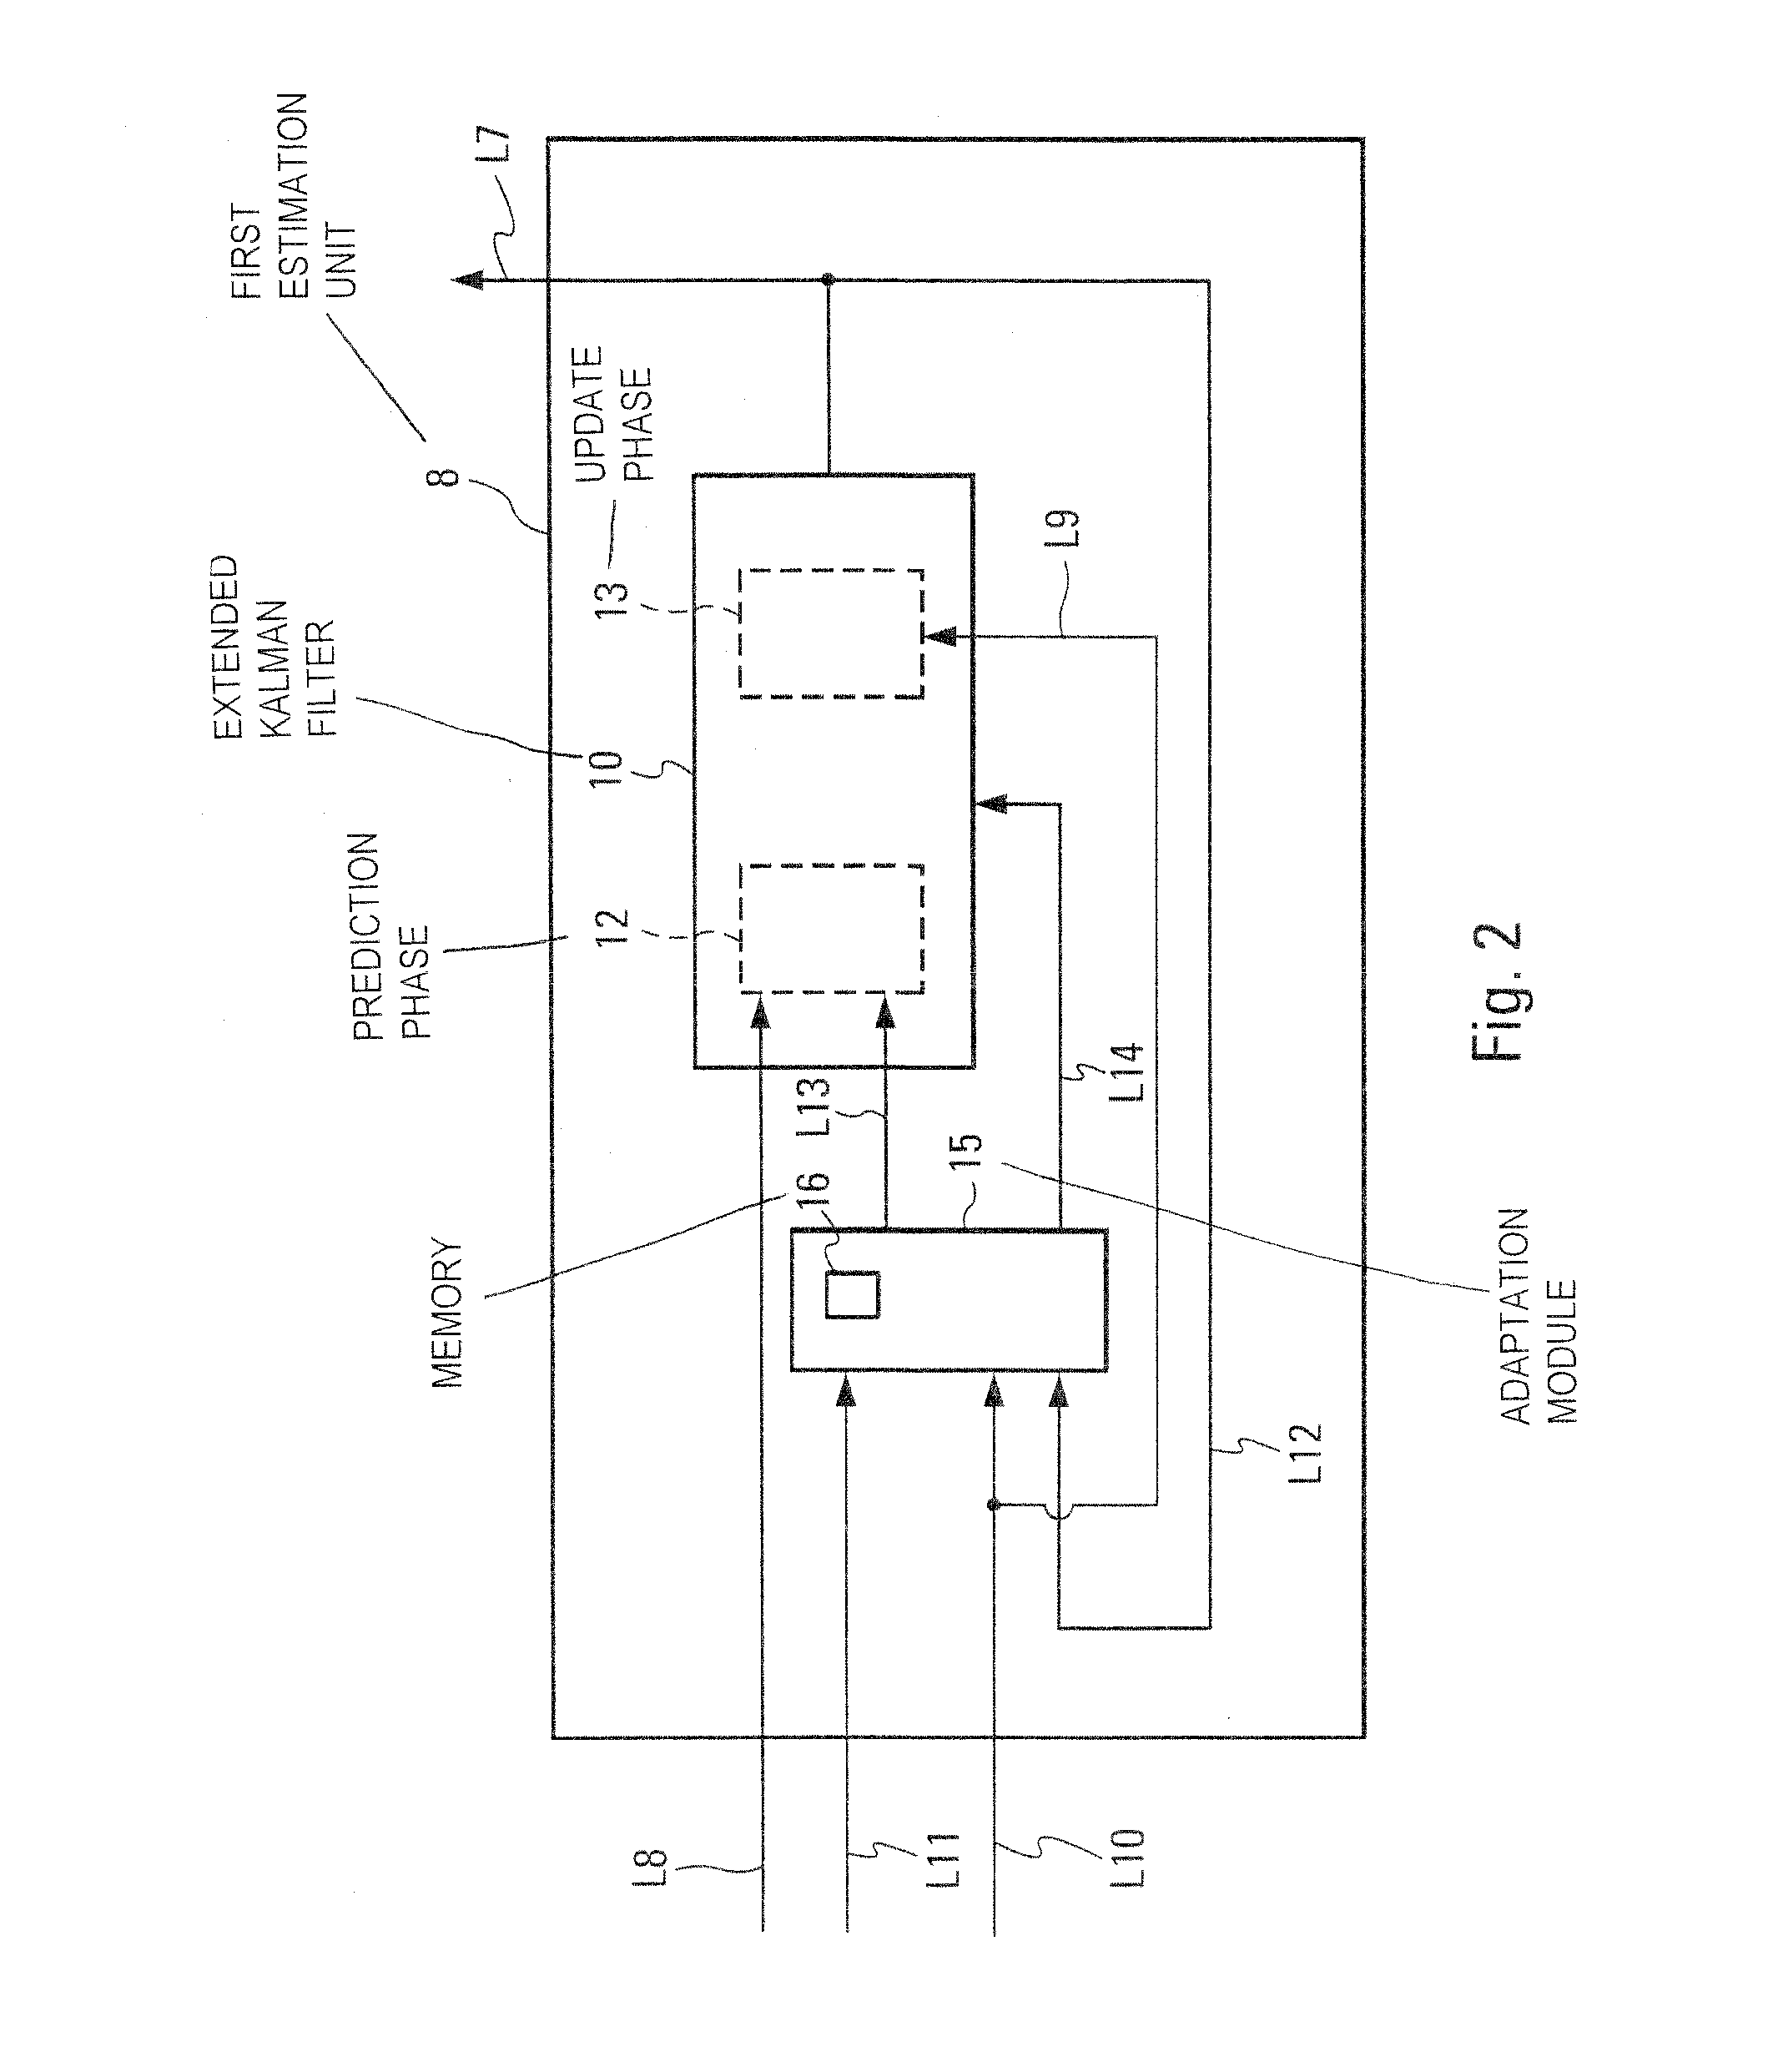 Method and system for determining flight parameters of an aircraft